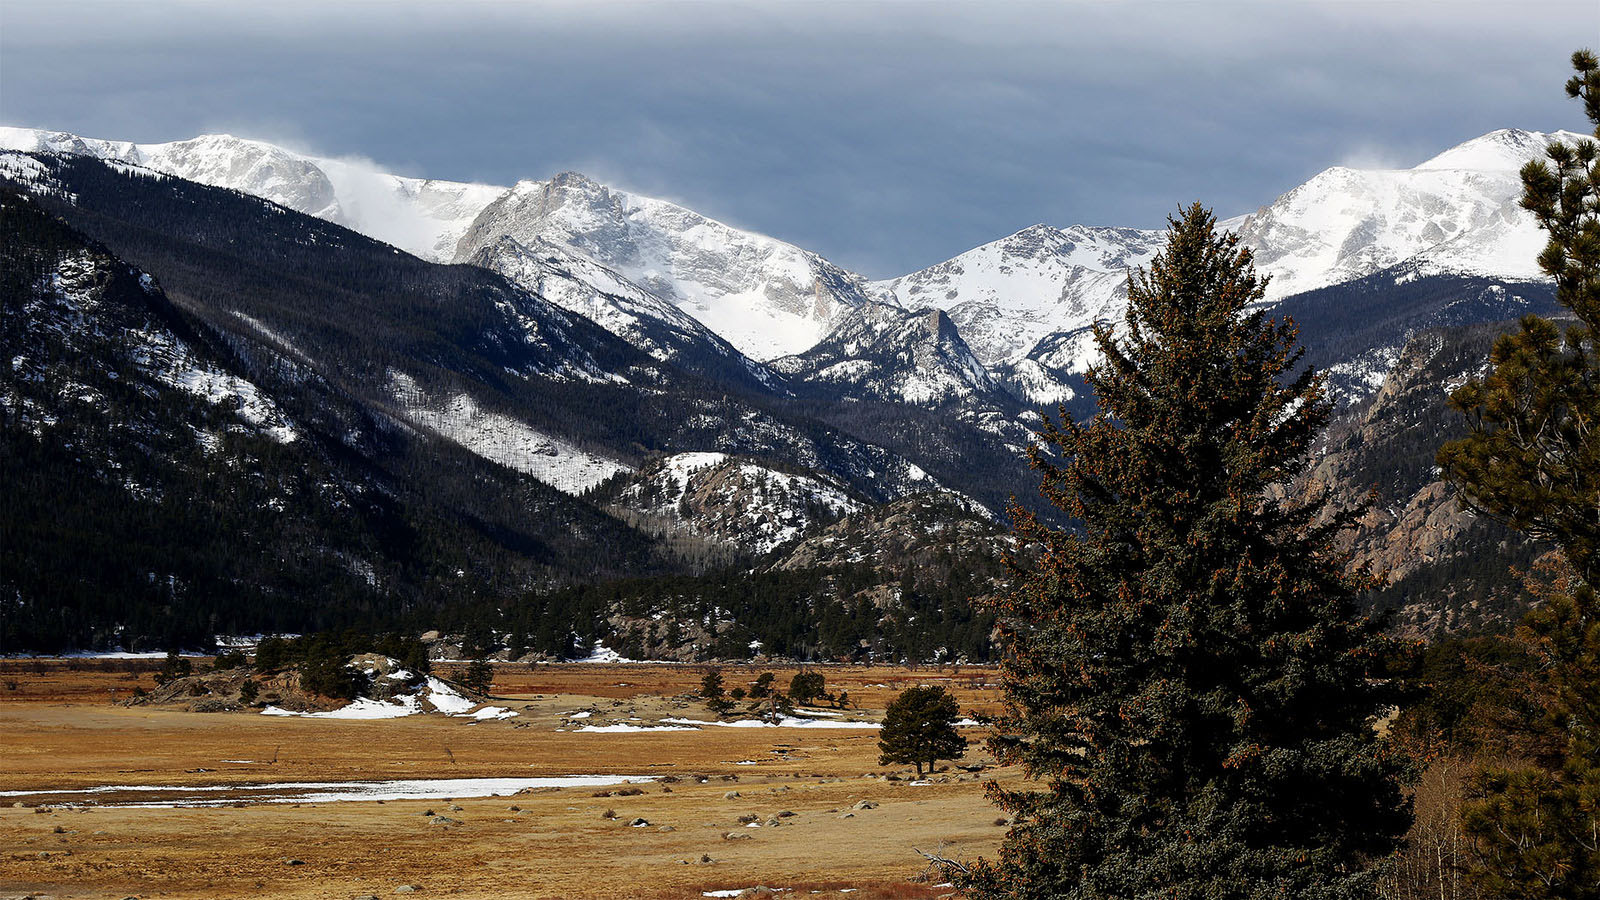 Rocky Mountain National Park in Colorado. (Courtesy flickr/M. Reed, National Park Services)